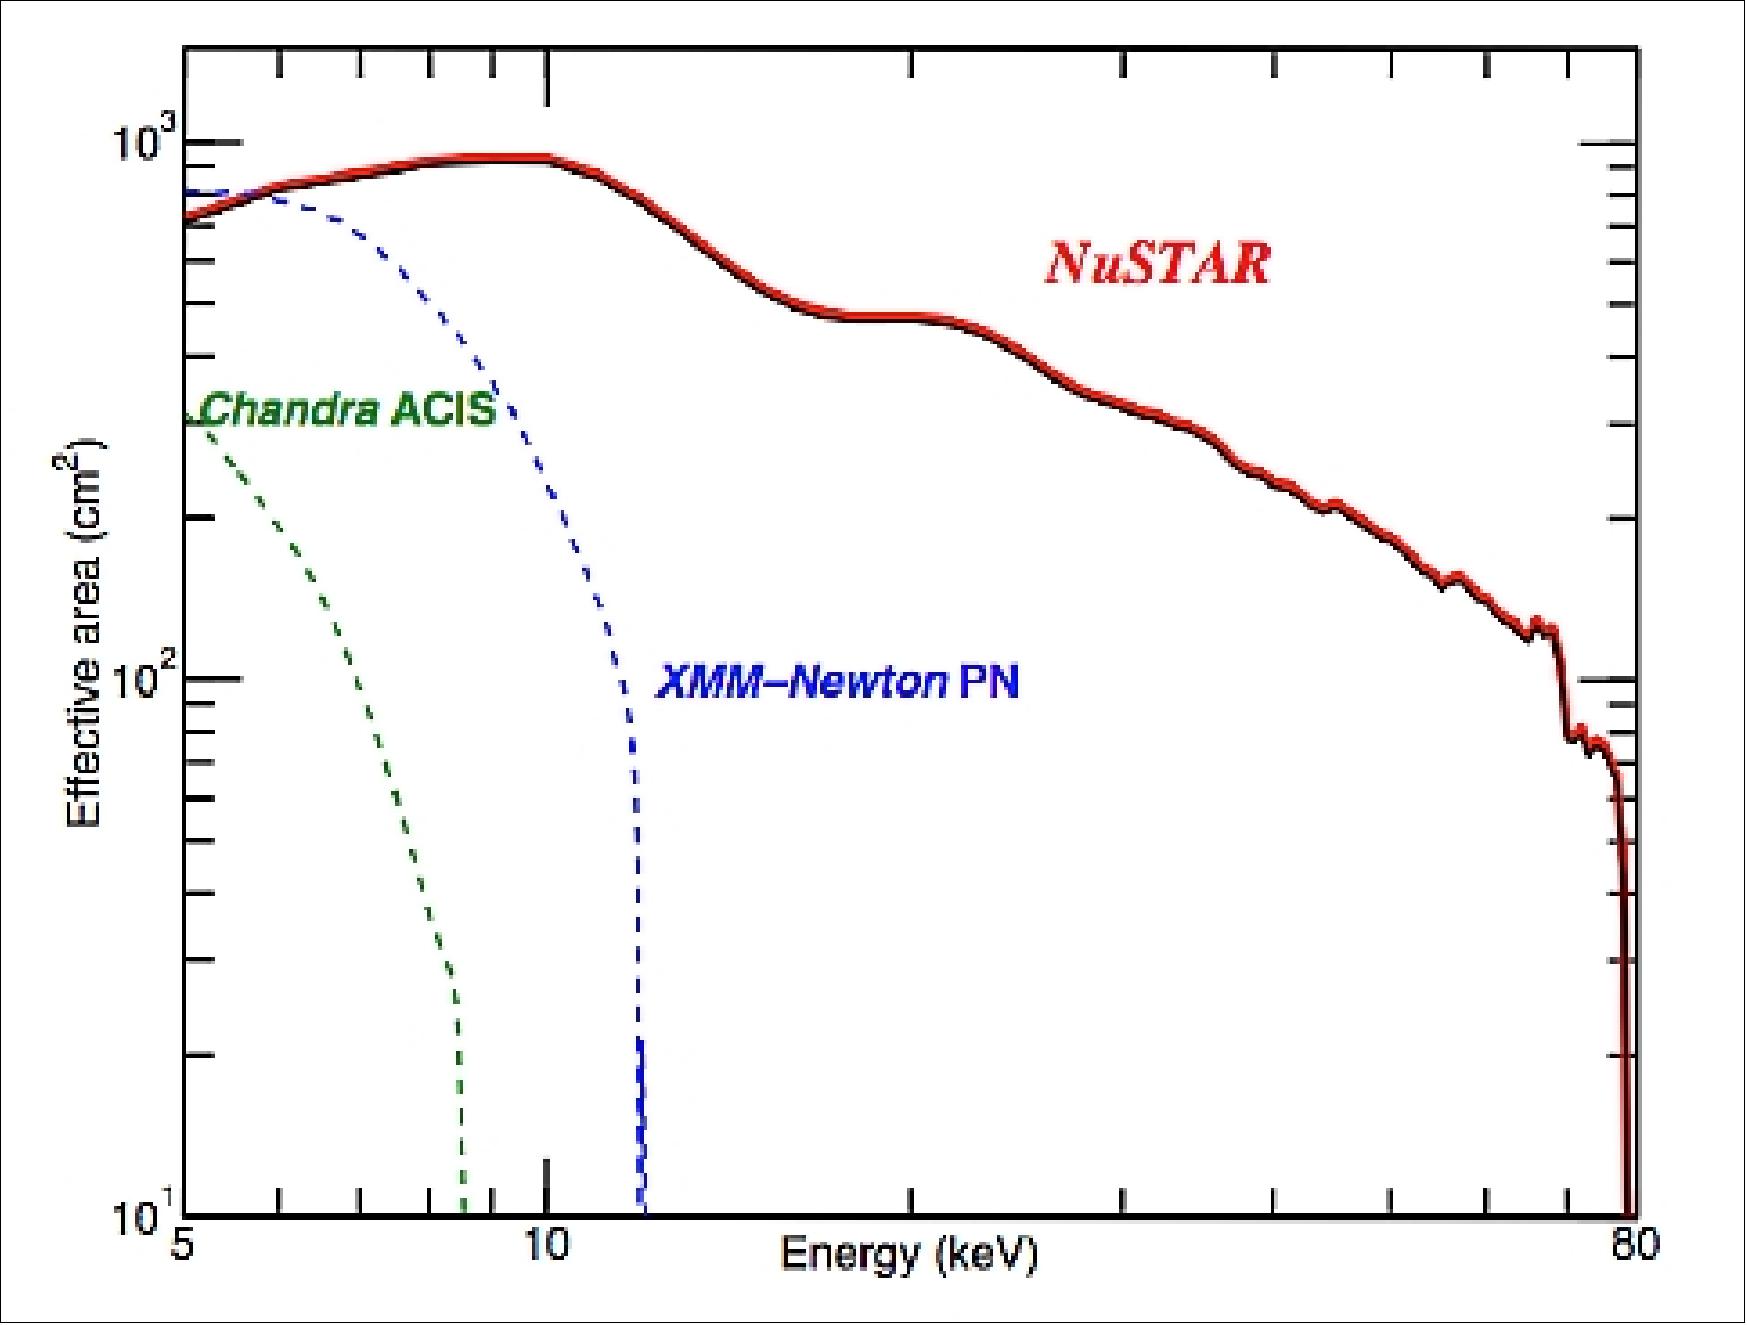 Figure 49: Effective area for two telescopes as a function of energy compared with the Chandra and XMM focusing telescopes (image credit: NuSTAR collaboration)